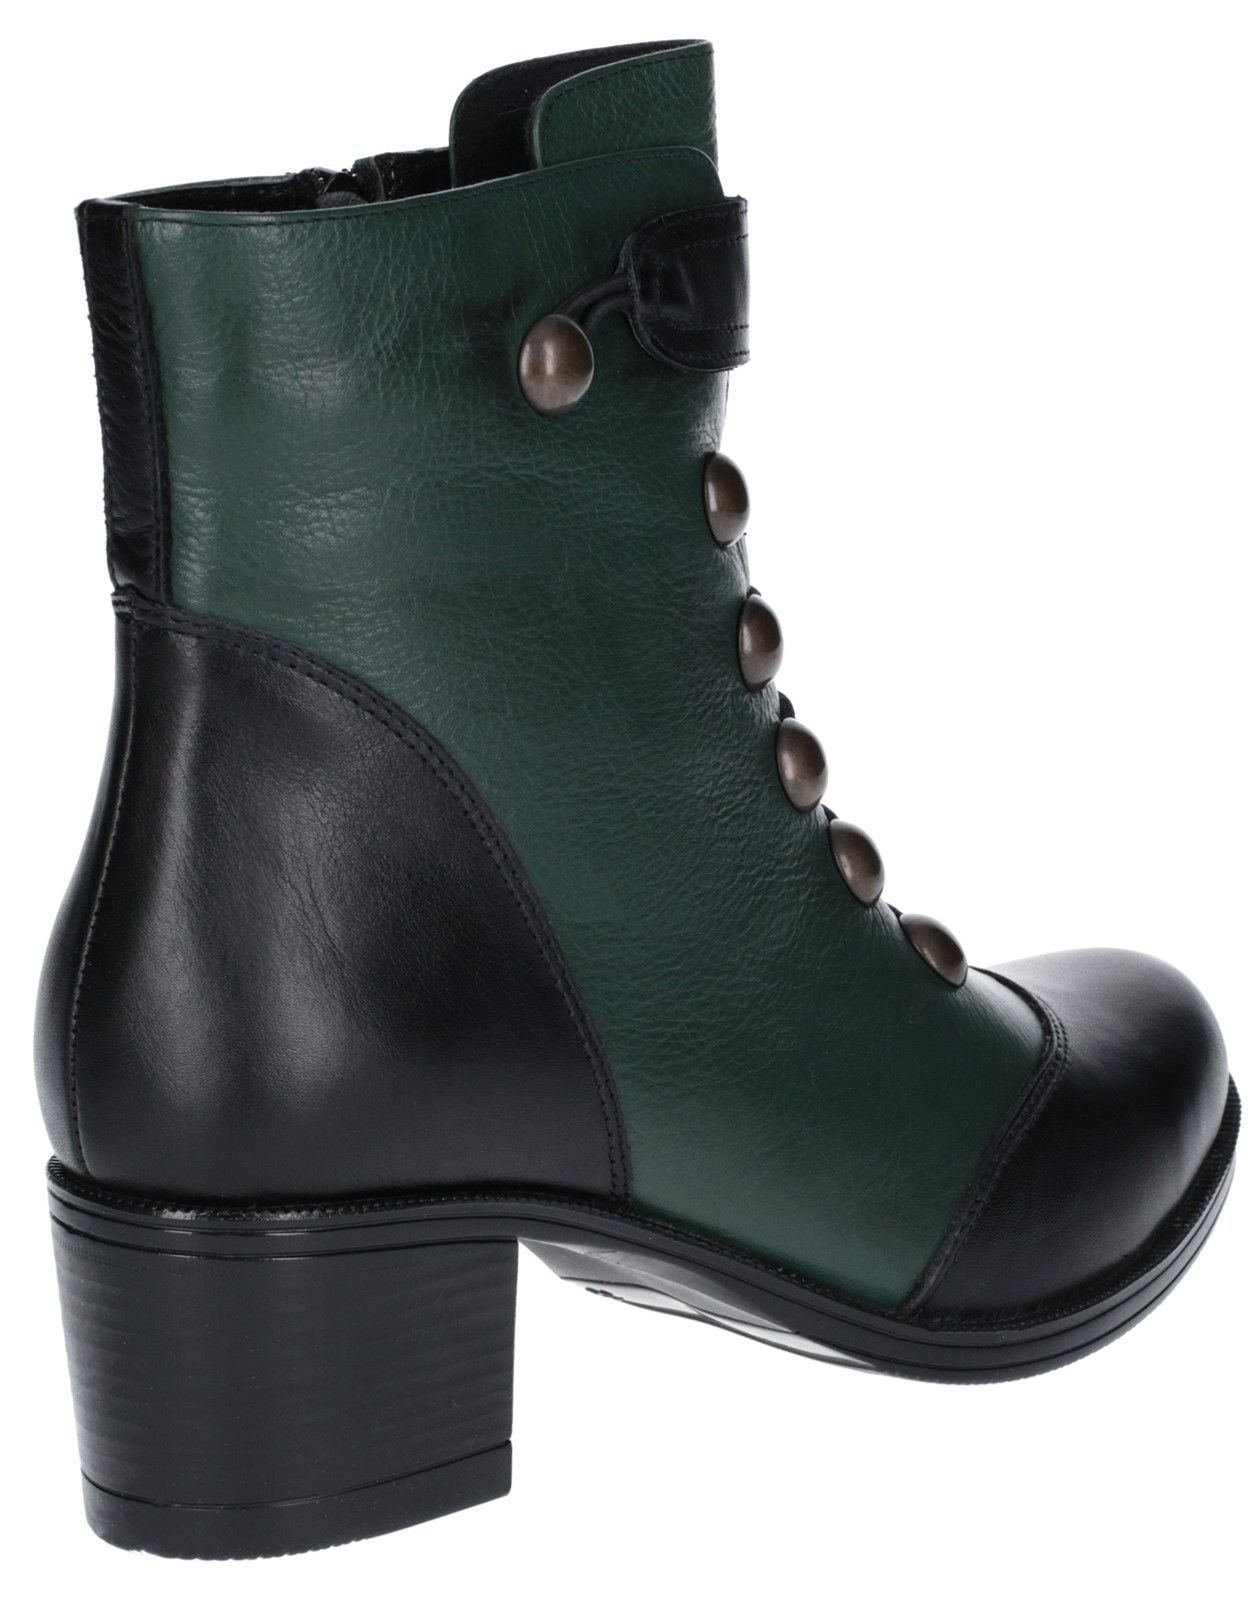 Stylish ladies long boot from Riva with luxury Leather Upper Leather.